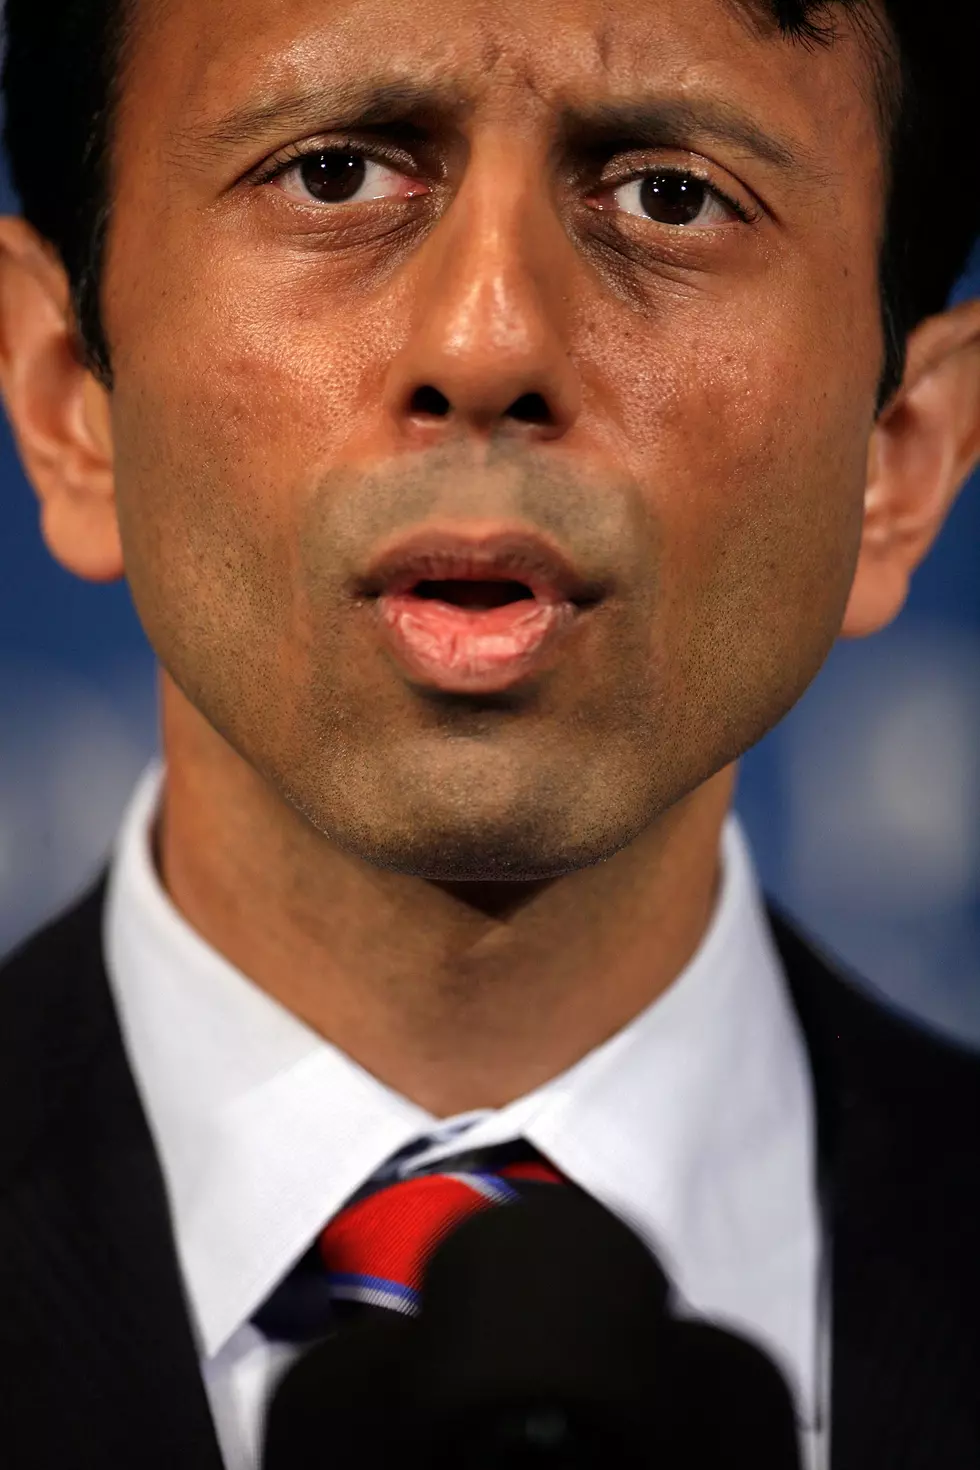 Gov. Jindal Being Sued For Meddling In Louisiana’s Use of Common Core Standards